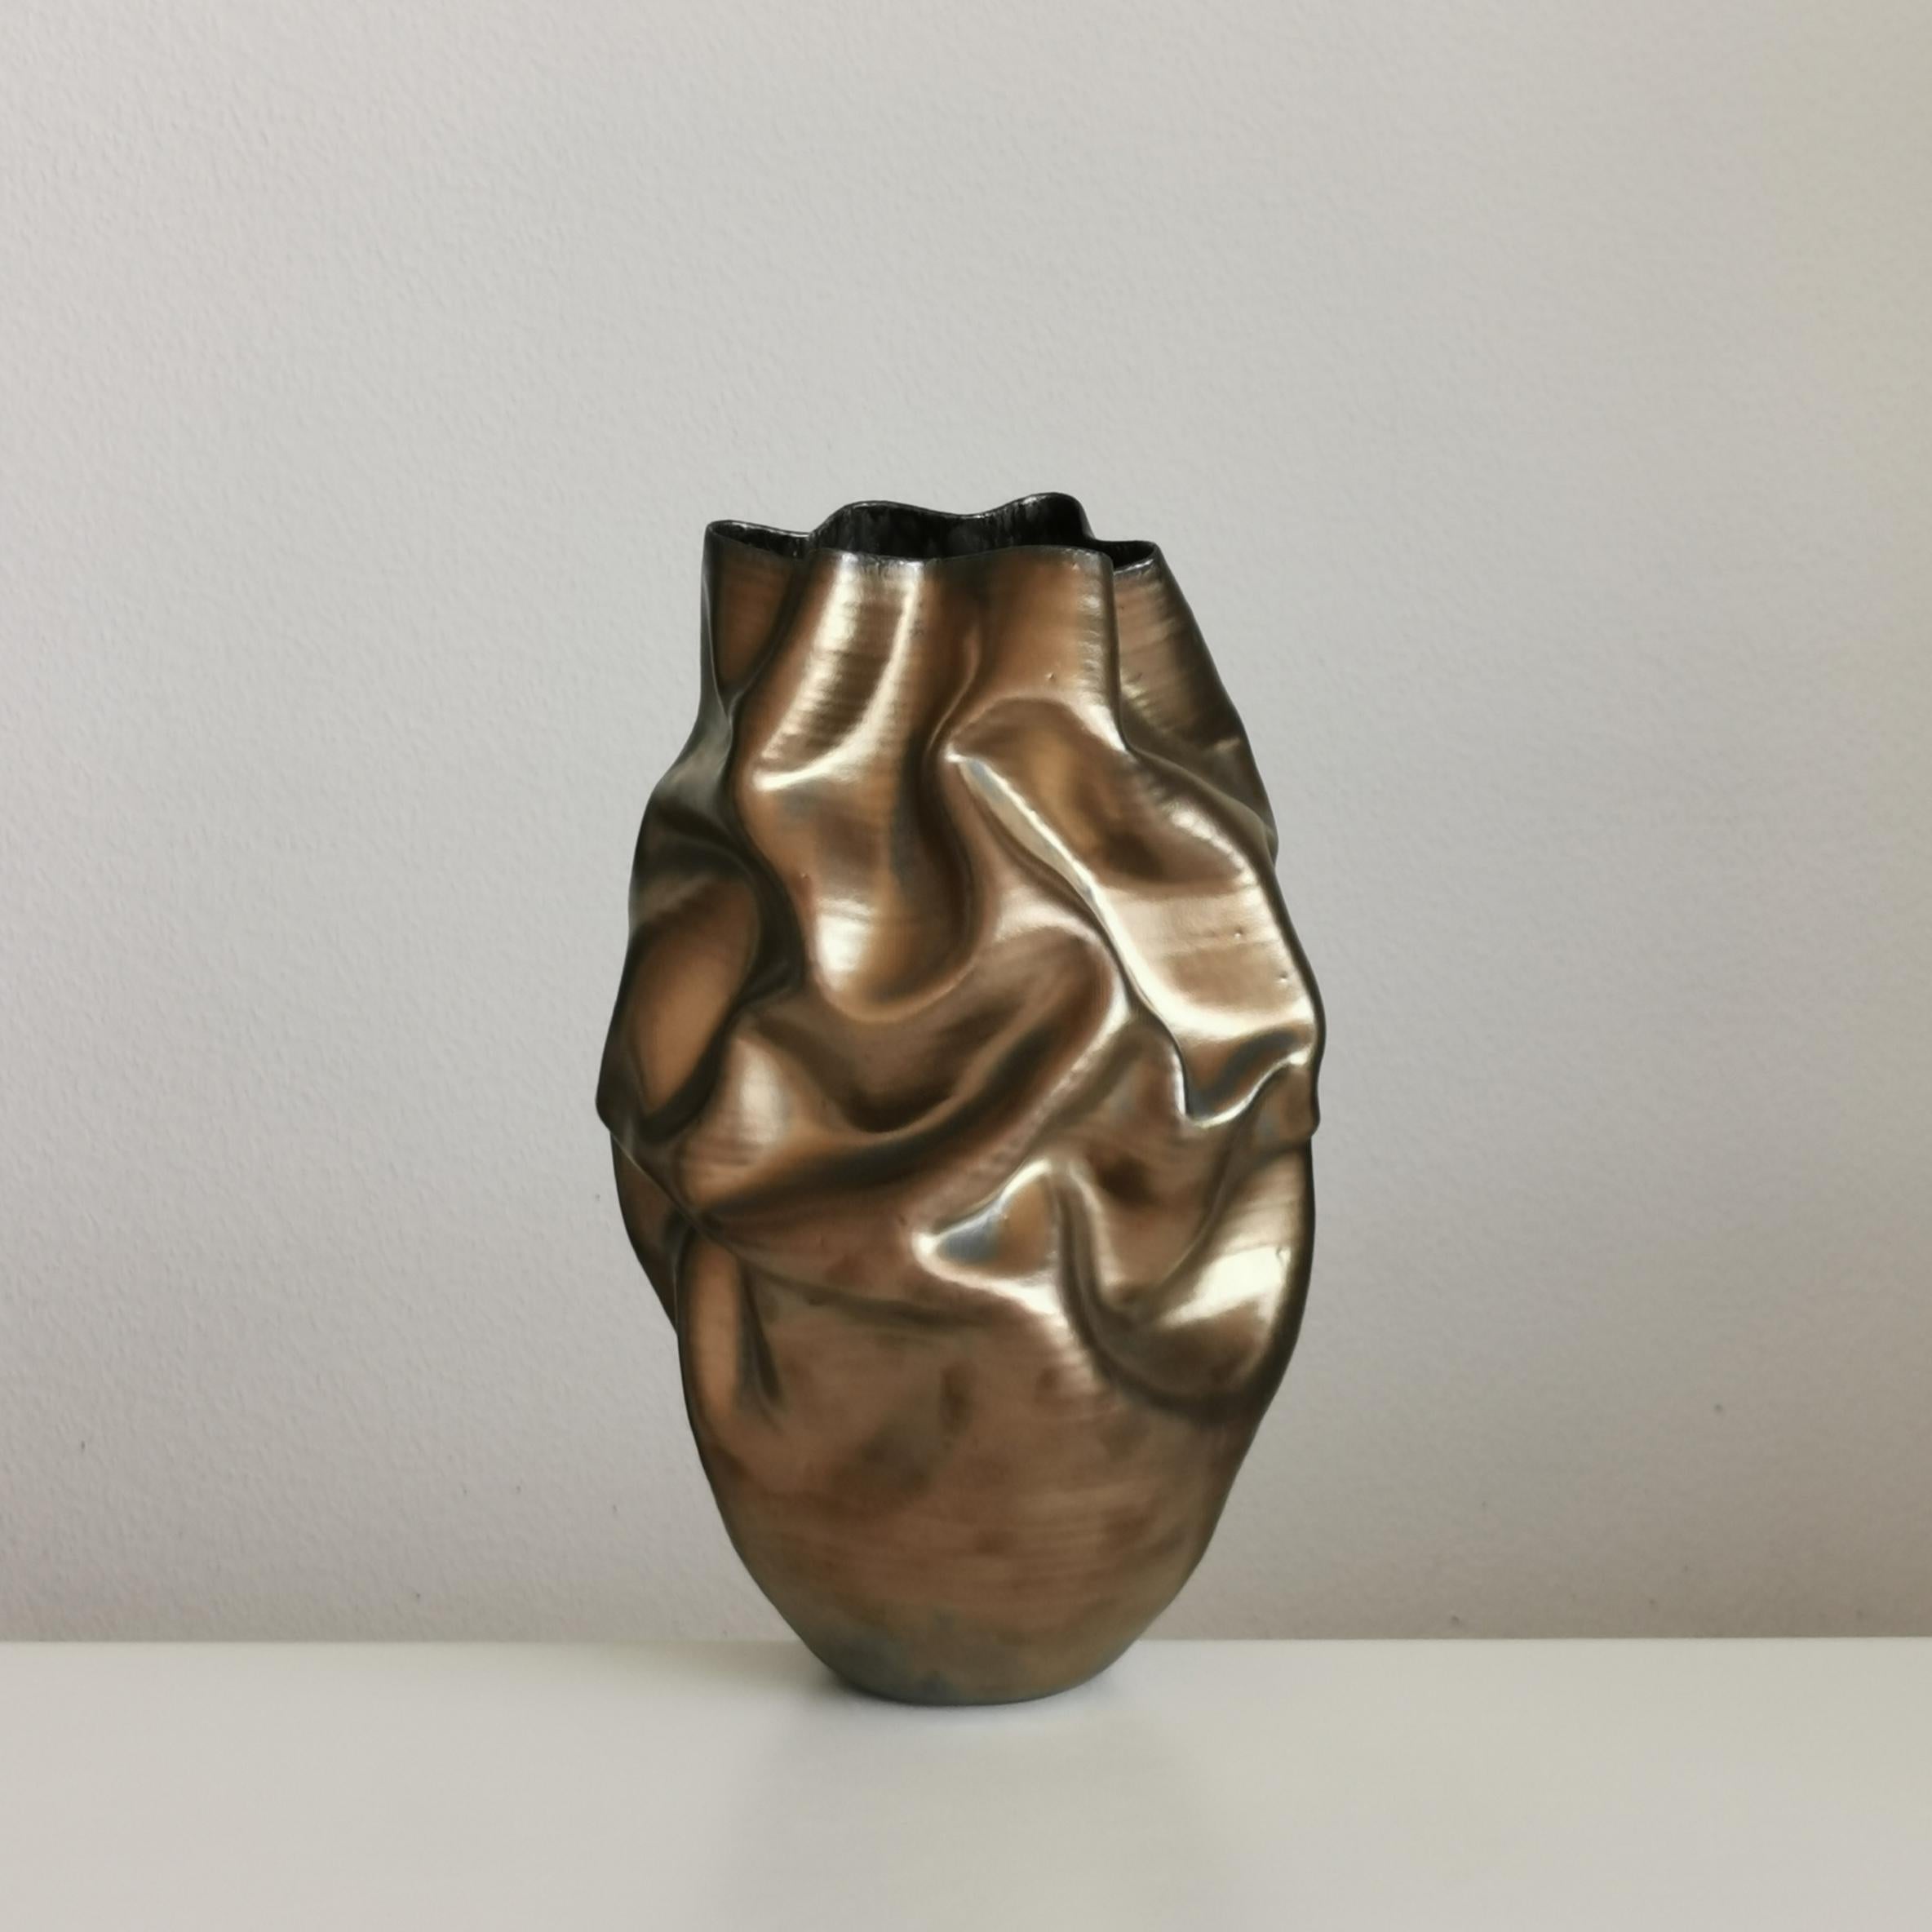 No. 131 Tall golden crumpled form. Sumptuous medium sized ceramic vessel from ceramic artist Nicholas Arroyave-Portela.

White St.Thomas clay, stoneware glazes, multi fired to cone 6 (1223 degrees)

Made in 2024
37 cm tall, 20 cm wide, 23 cm